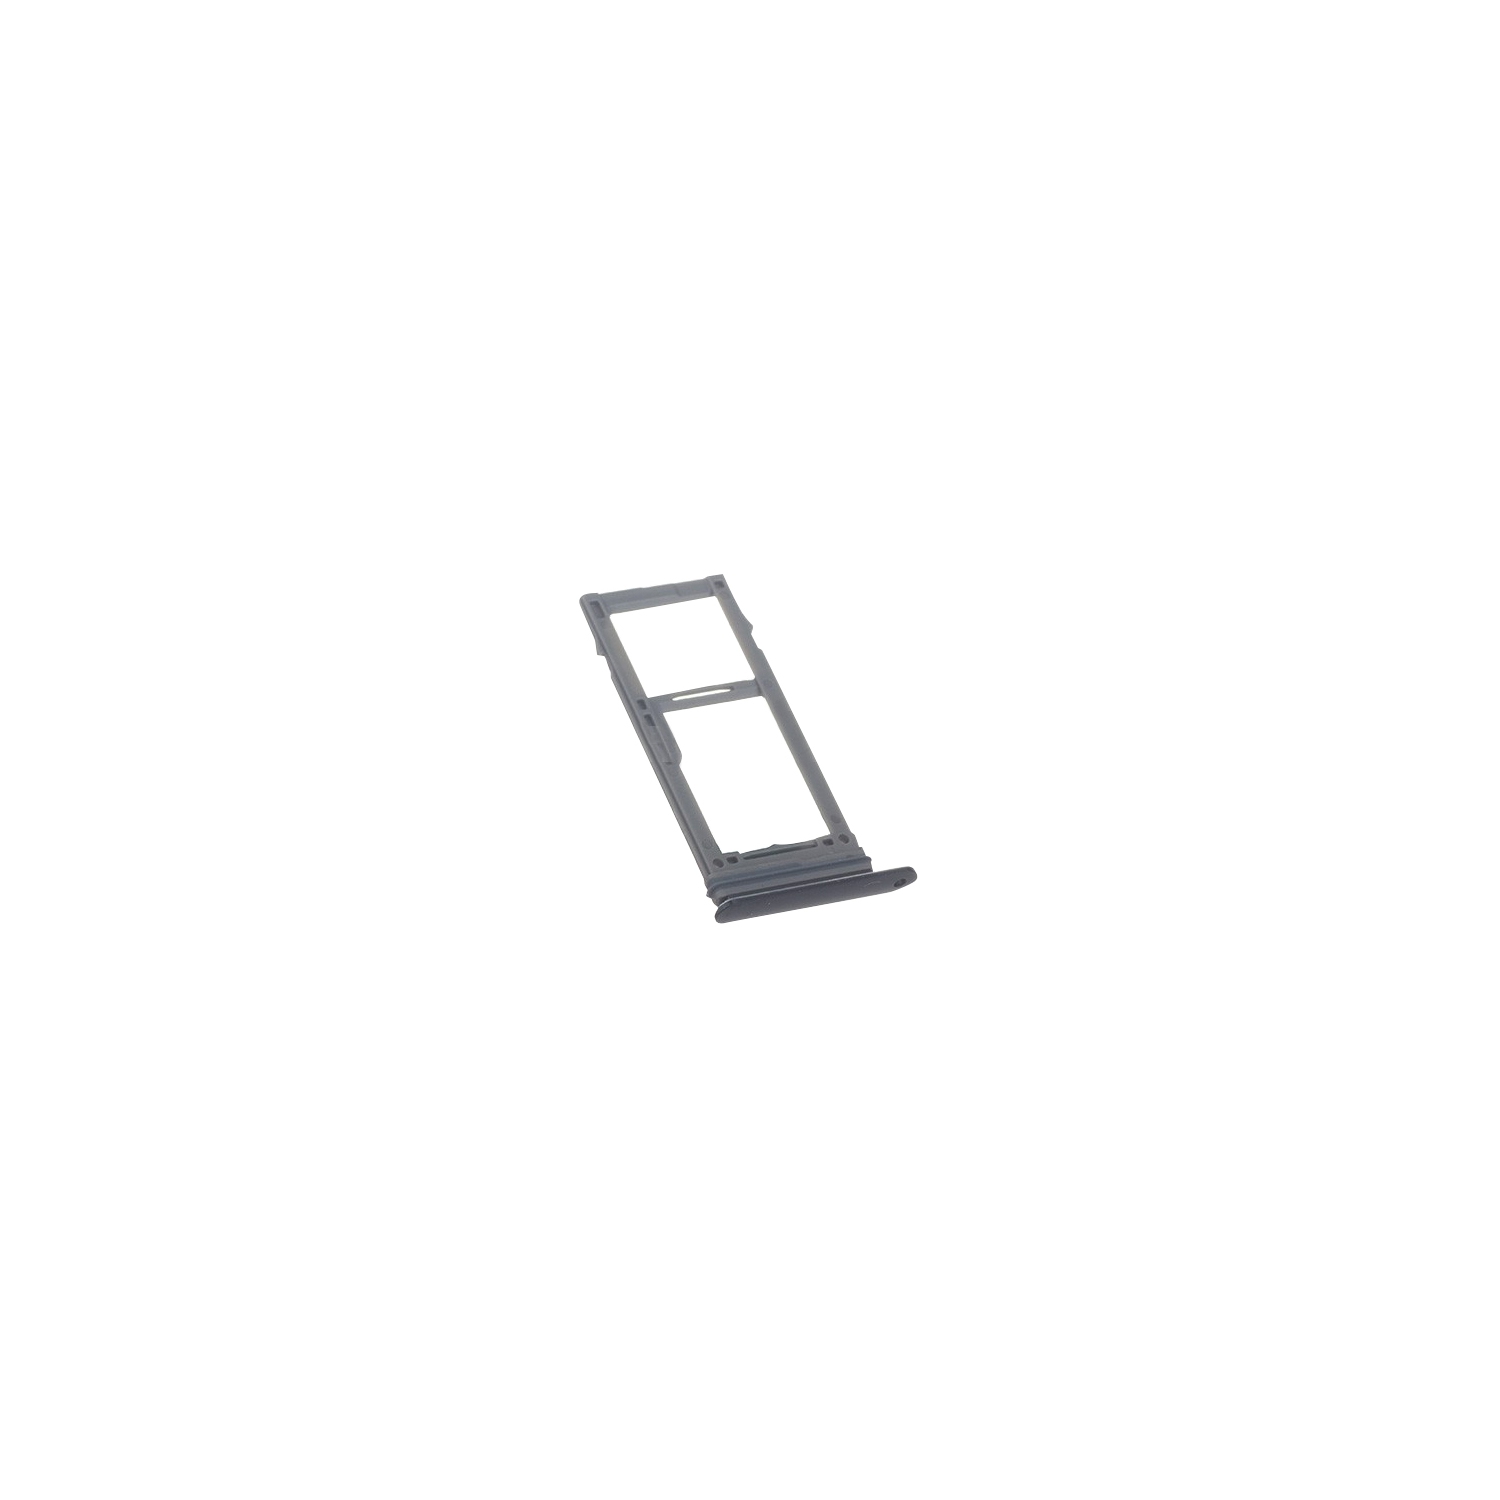 Samsung Galaxy Note 9 SIM and MicroSD Card Tray Holder Replacement - Black